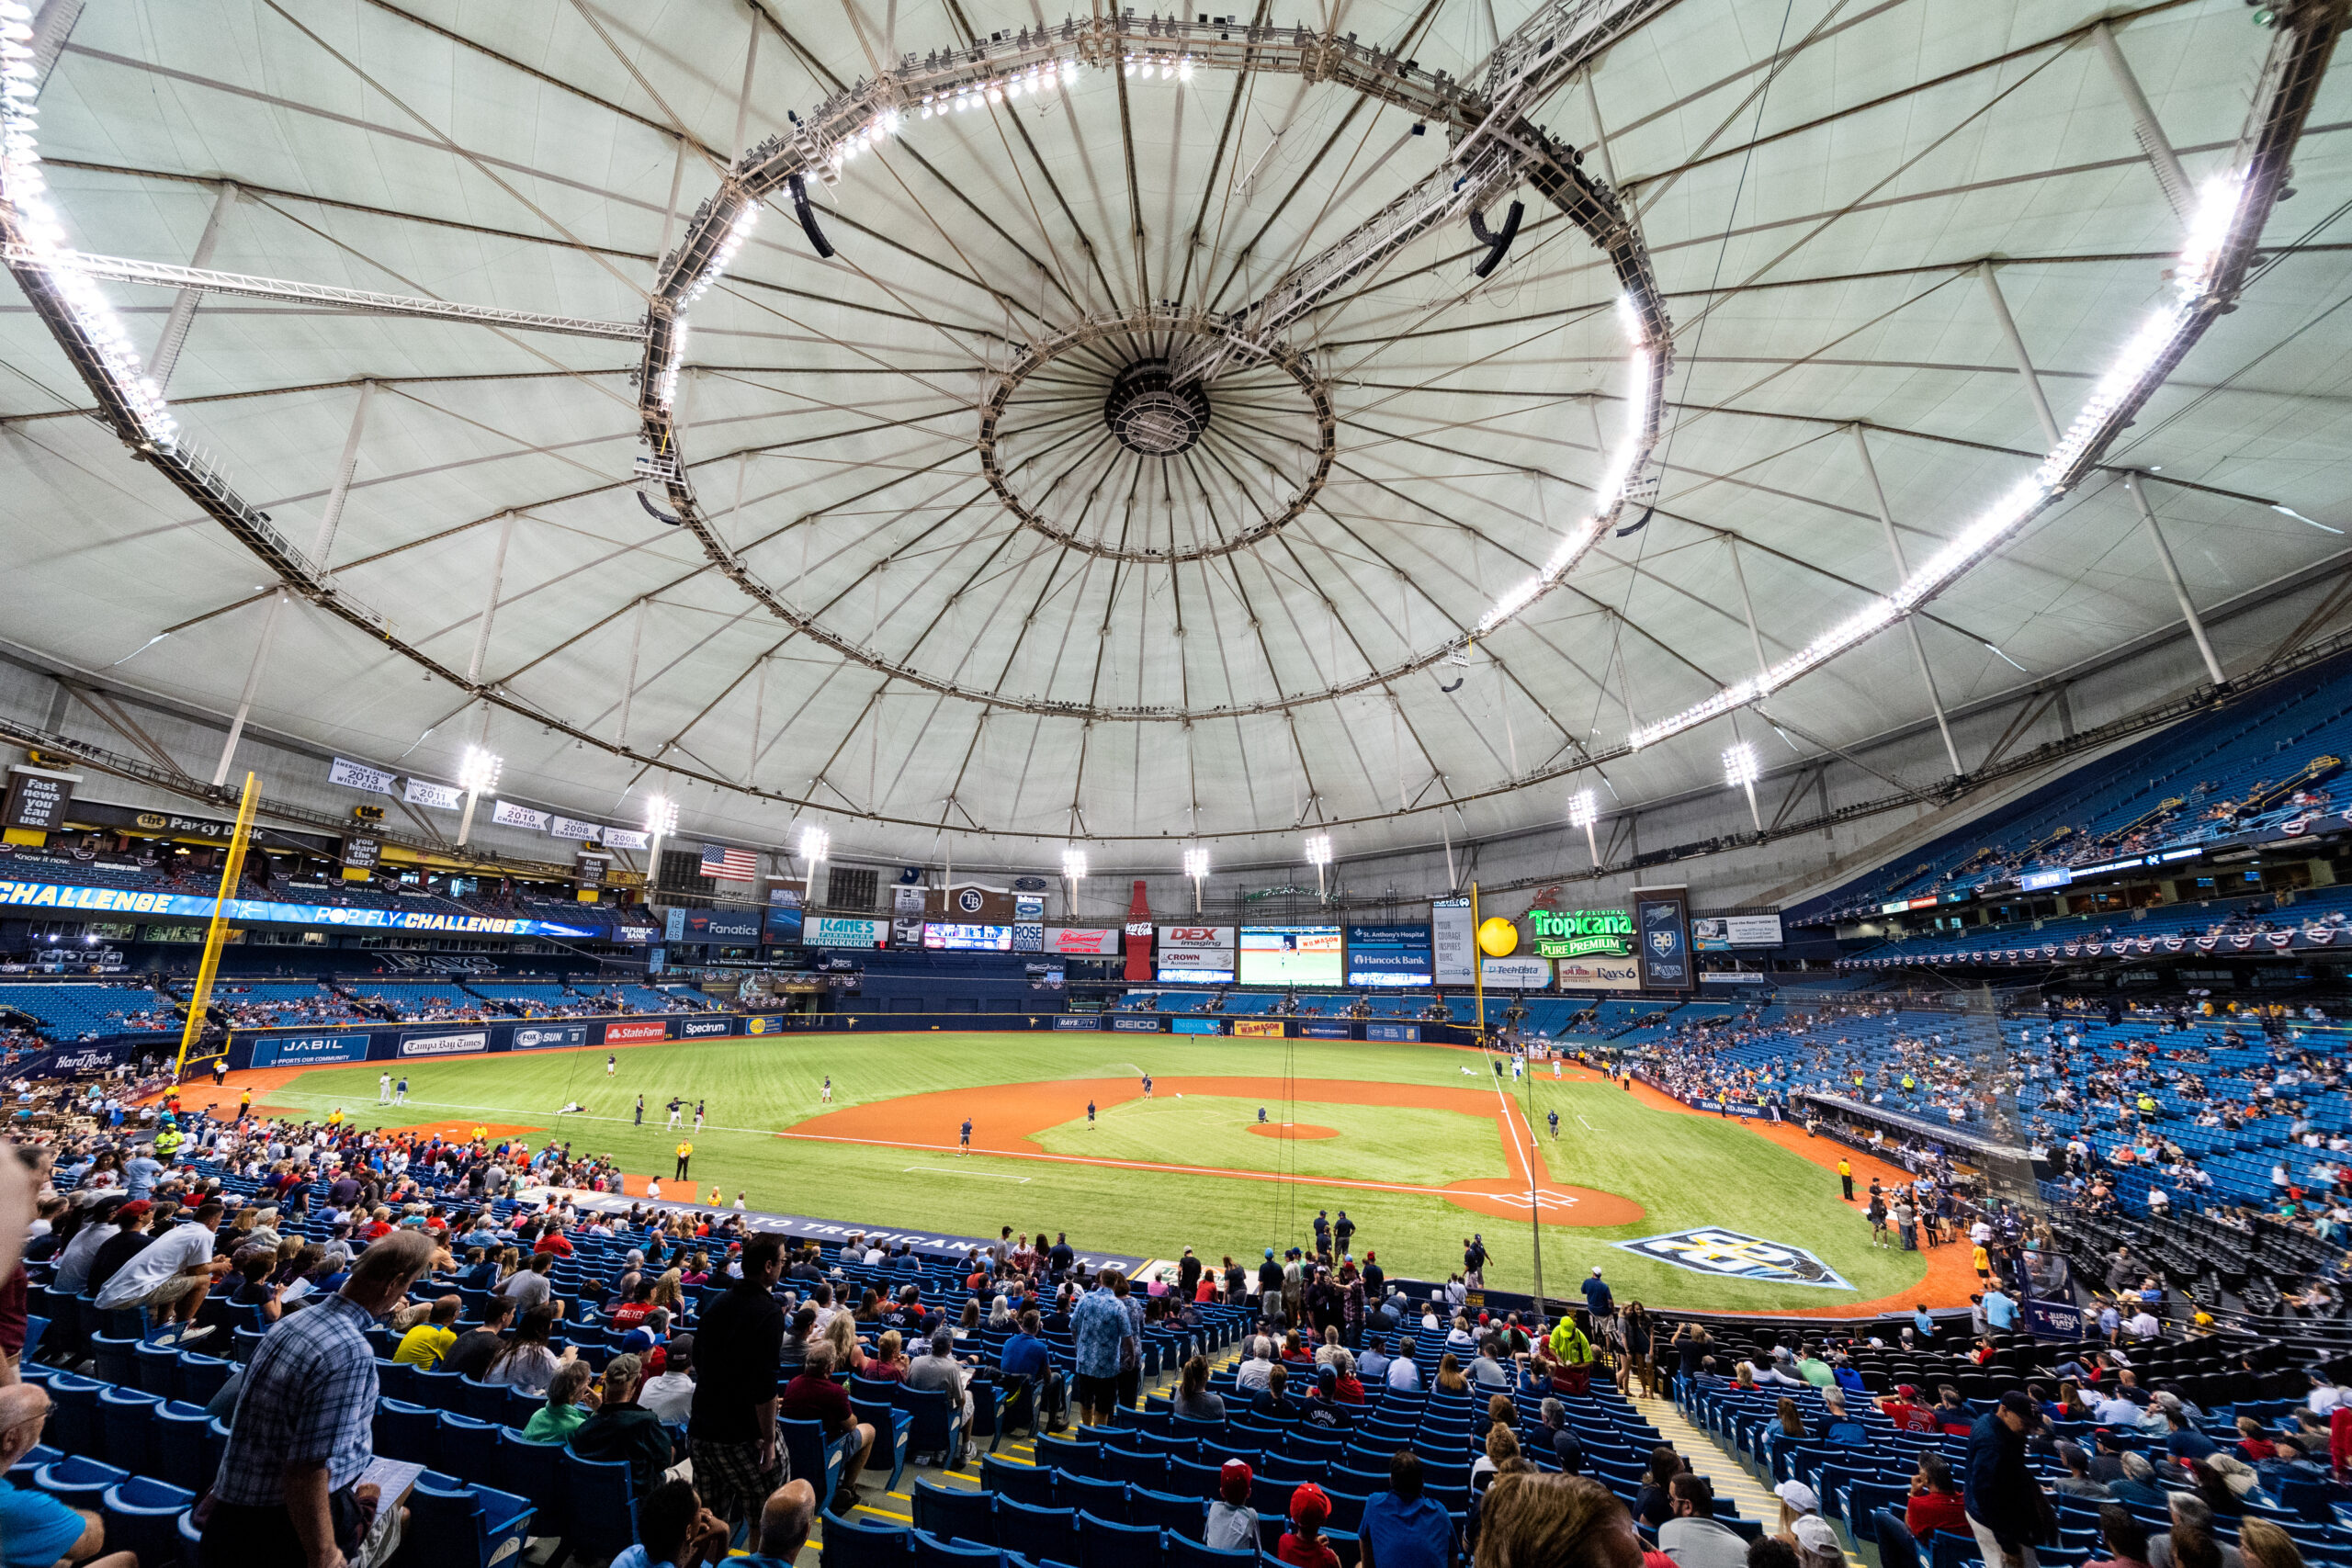 USF wants say in redevelopment plans of Tropicana Field – The Oracle